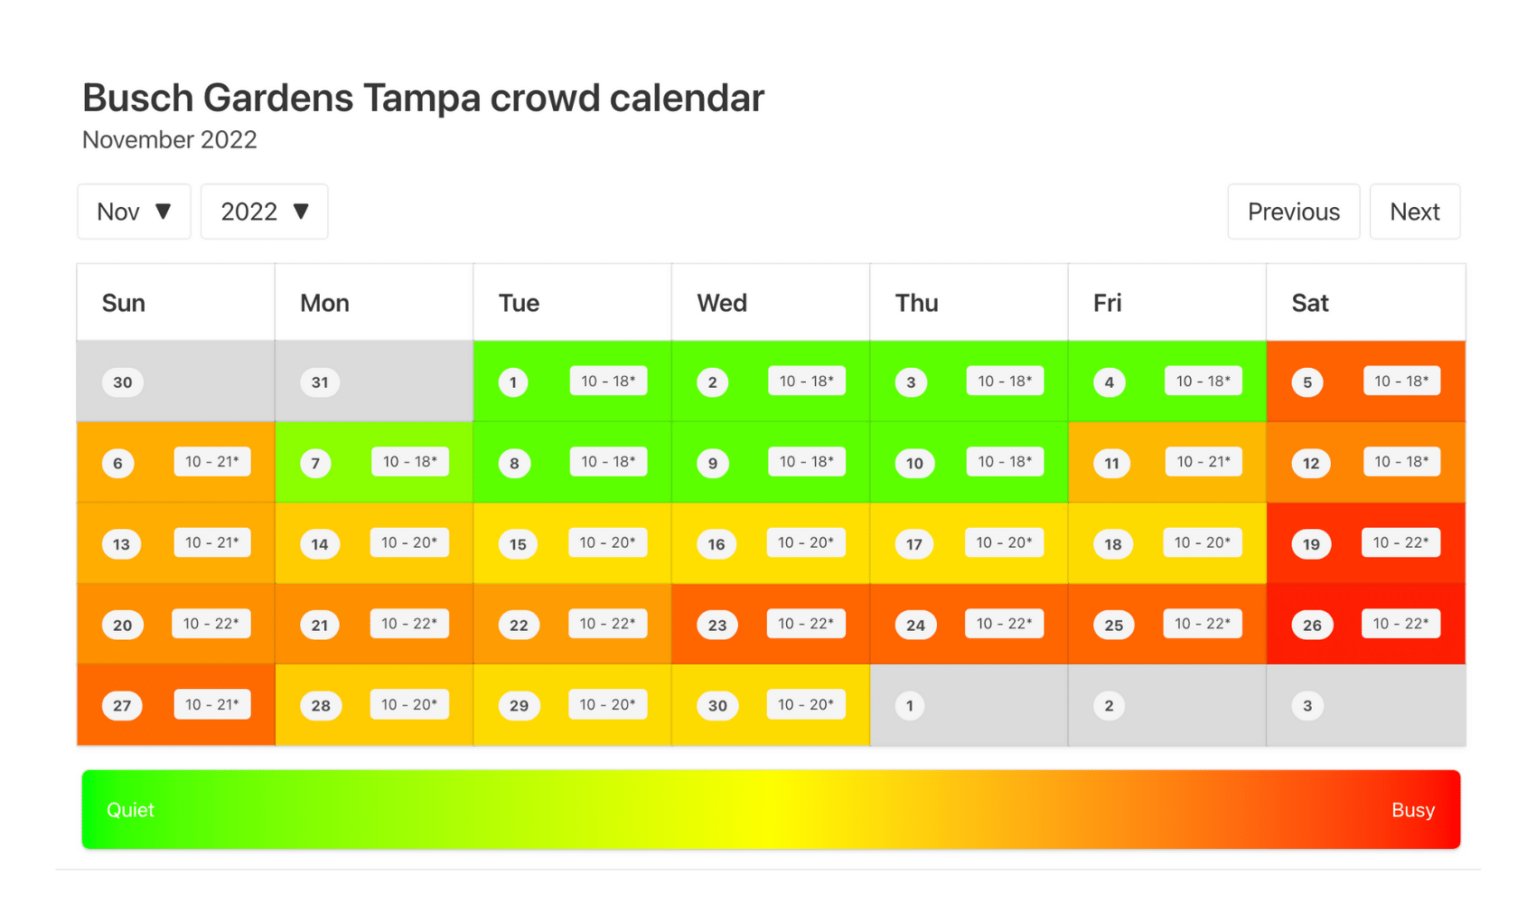 Busch Gardens Tampa Crowd Calendar AVOID THE BUSY DAYS! ThemeParkHipster